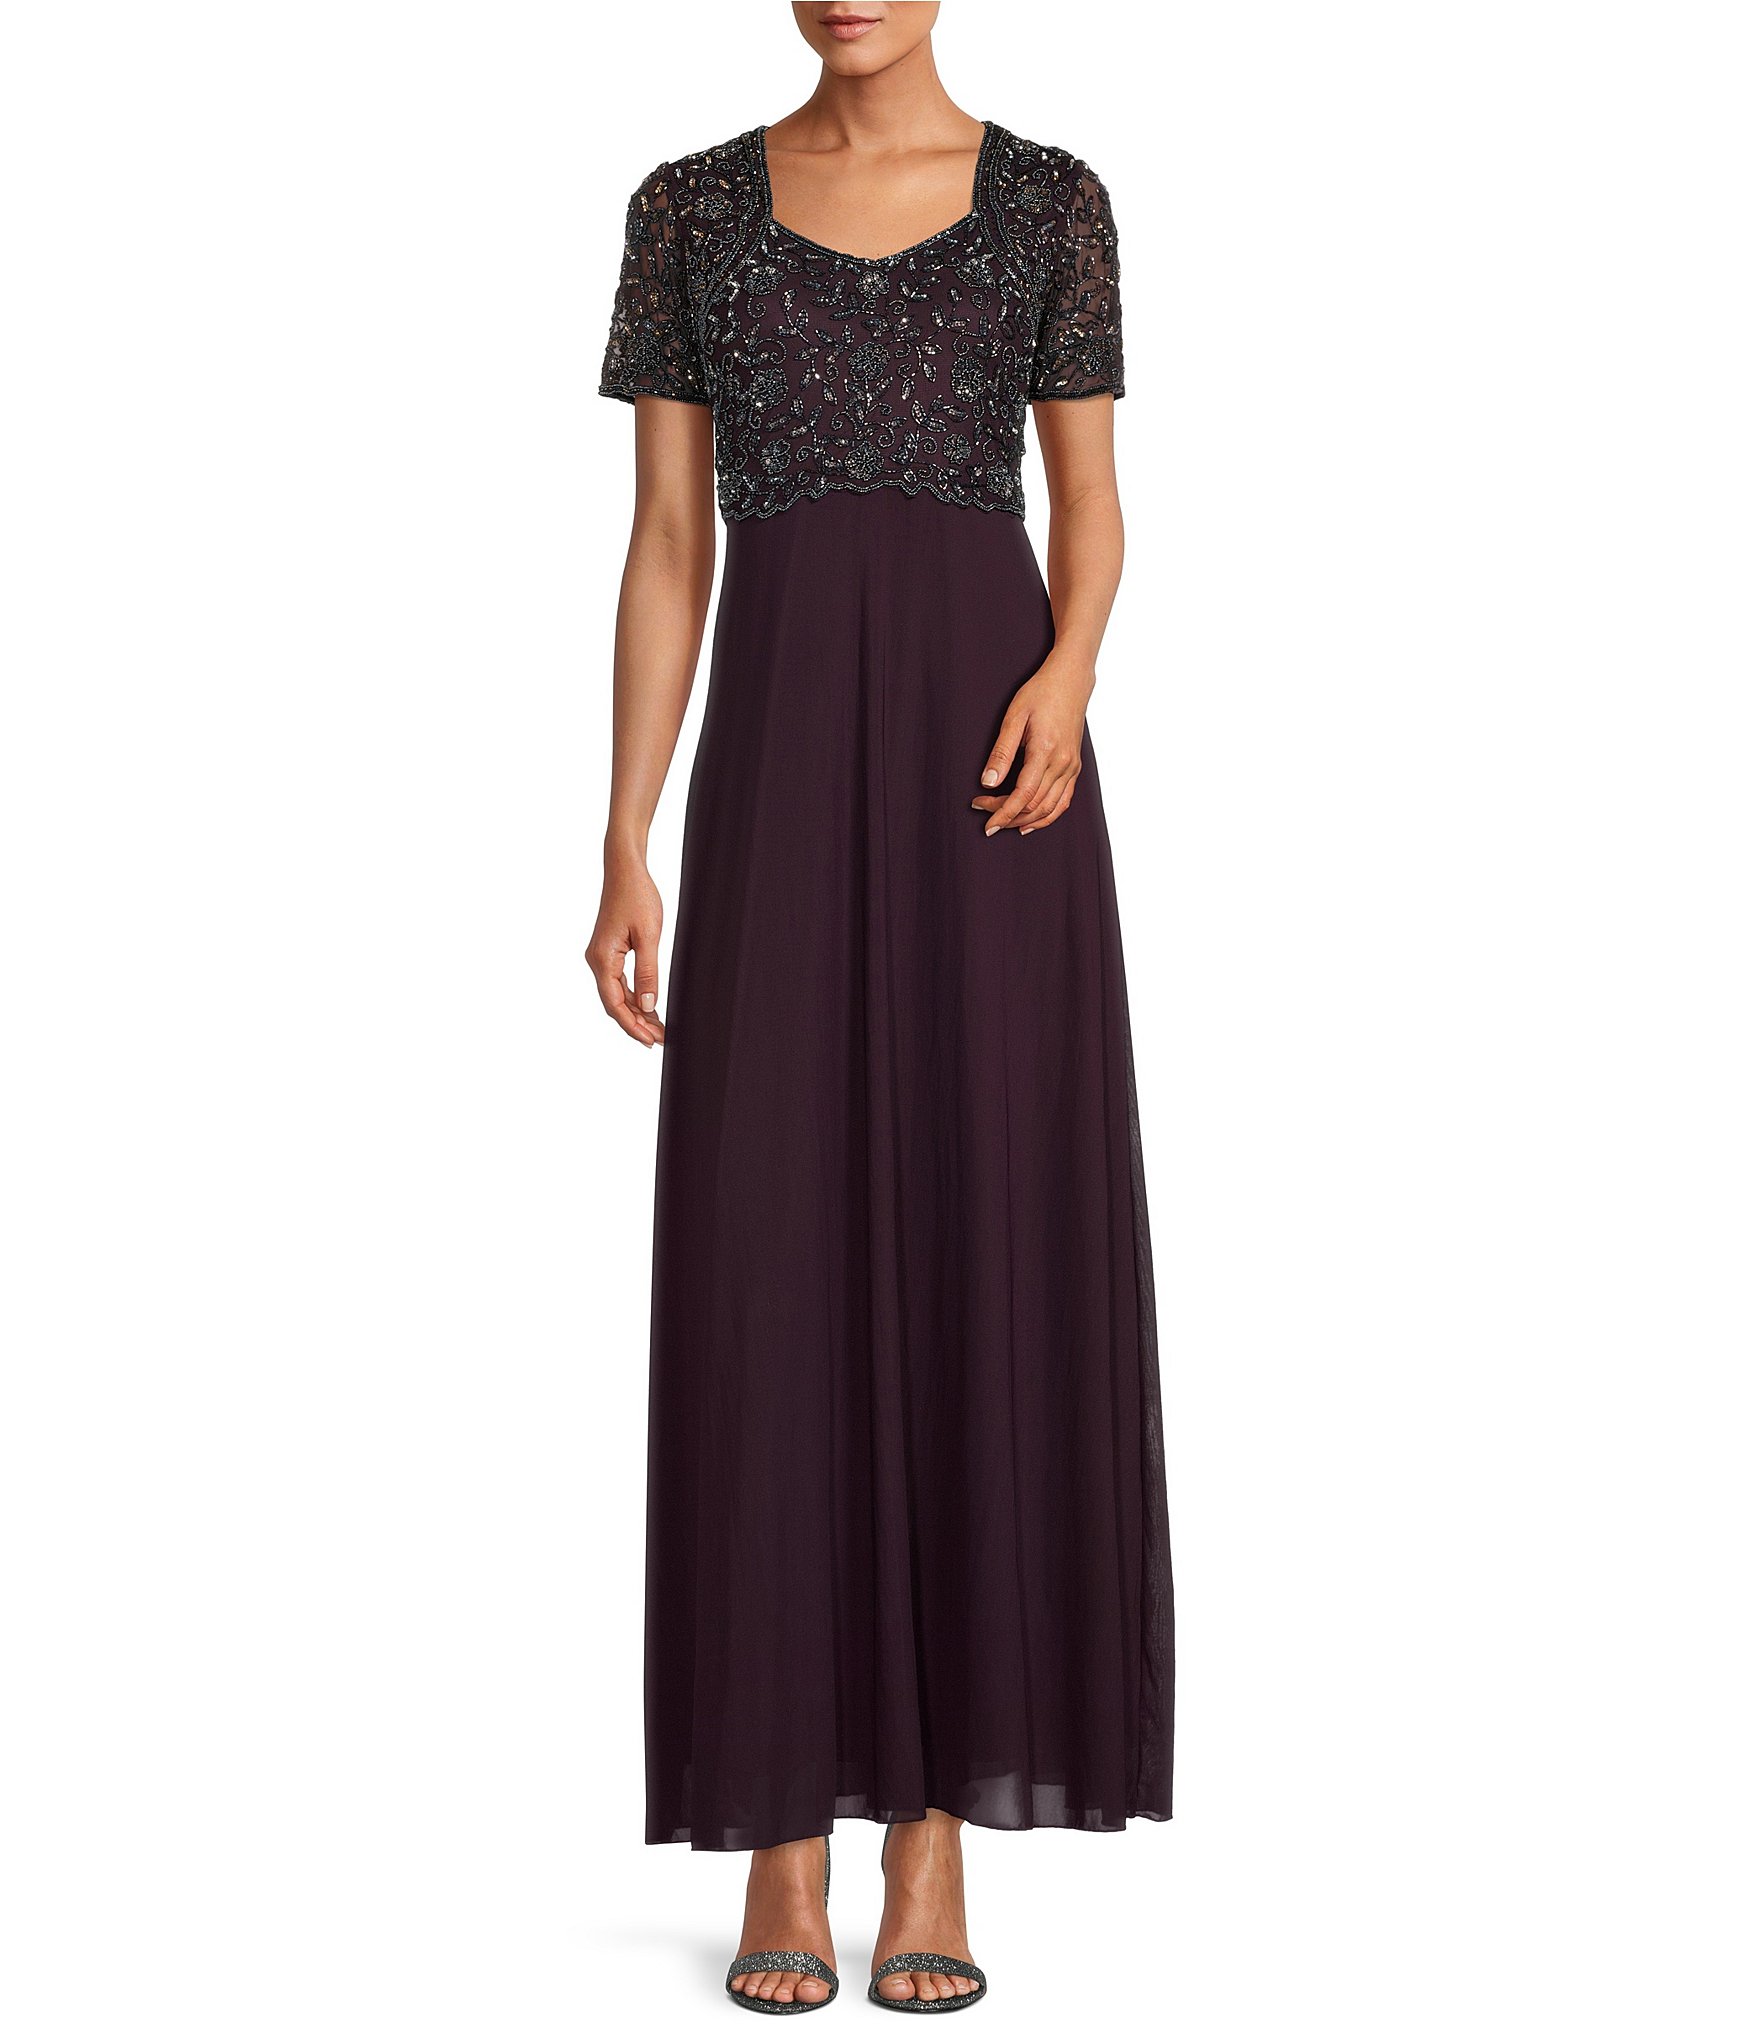 Pisarro Nights Beaded Bodice Square Neck Short Sleeve A-Line Gown ...